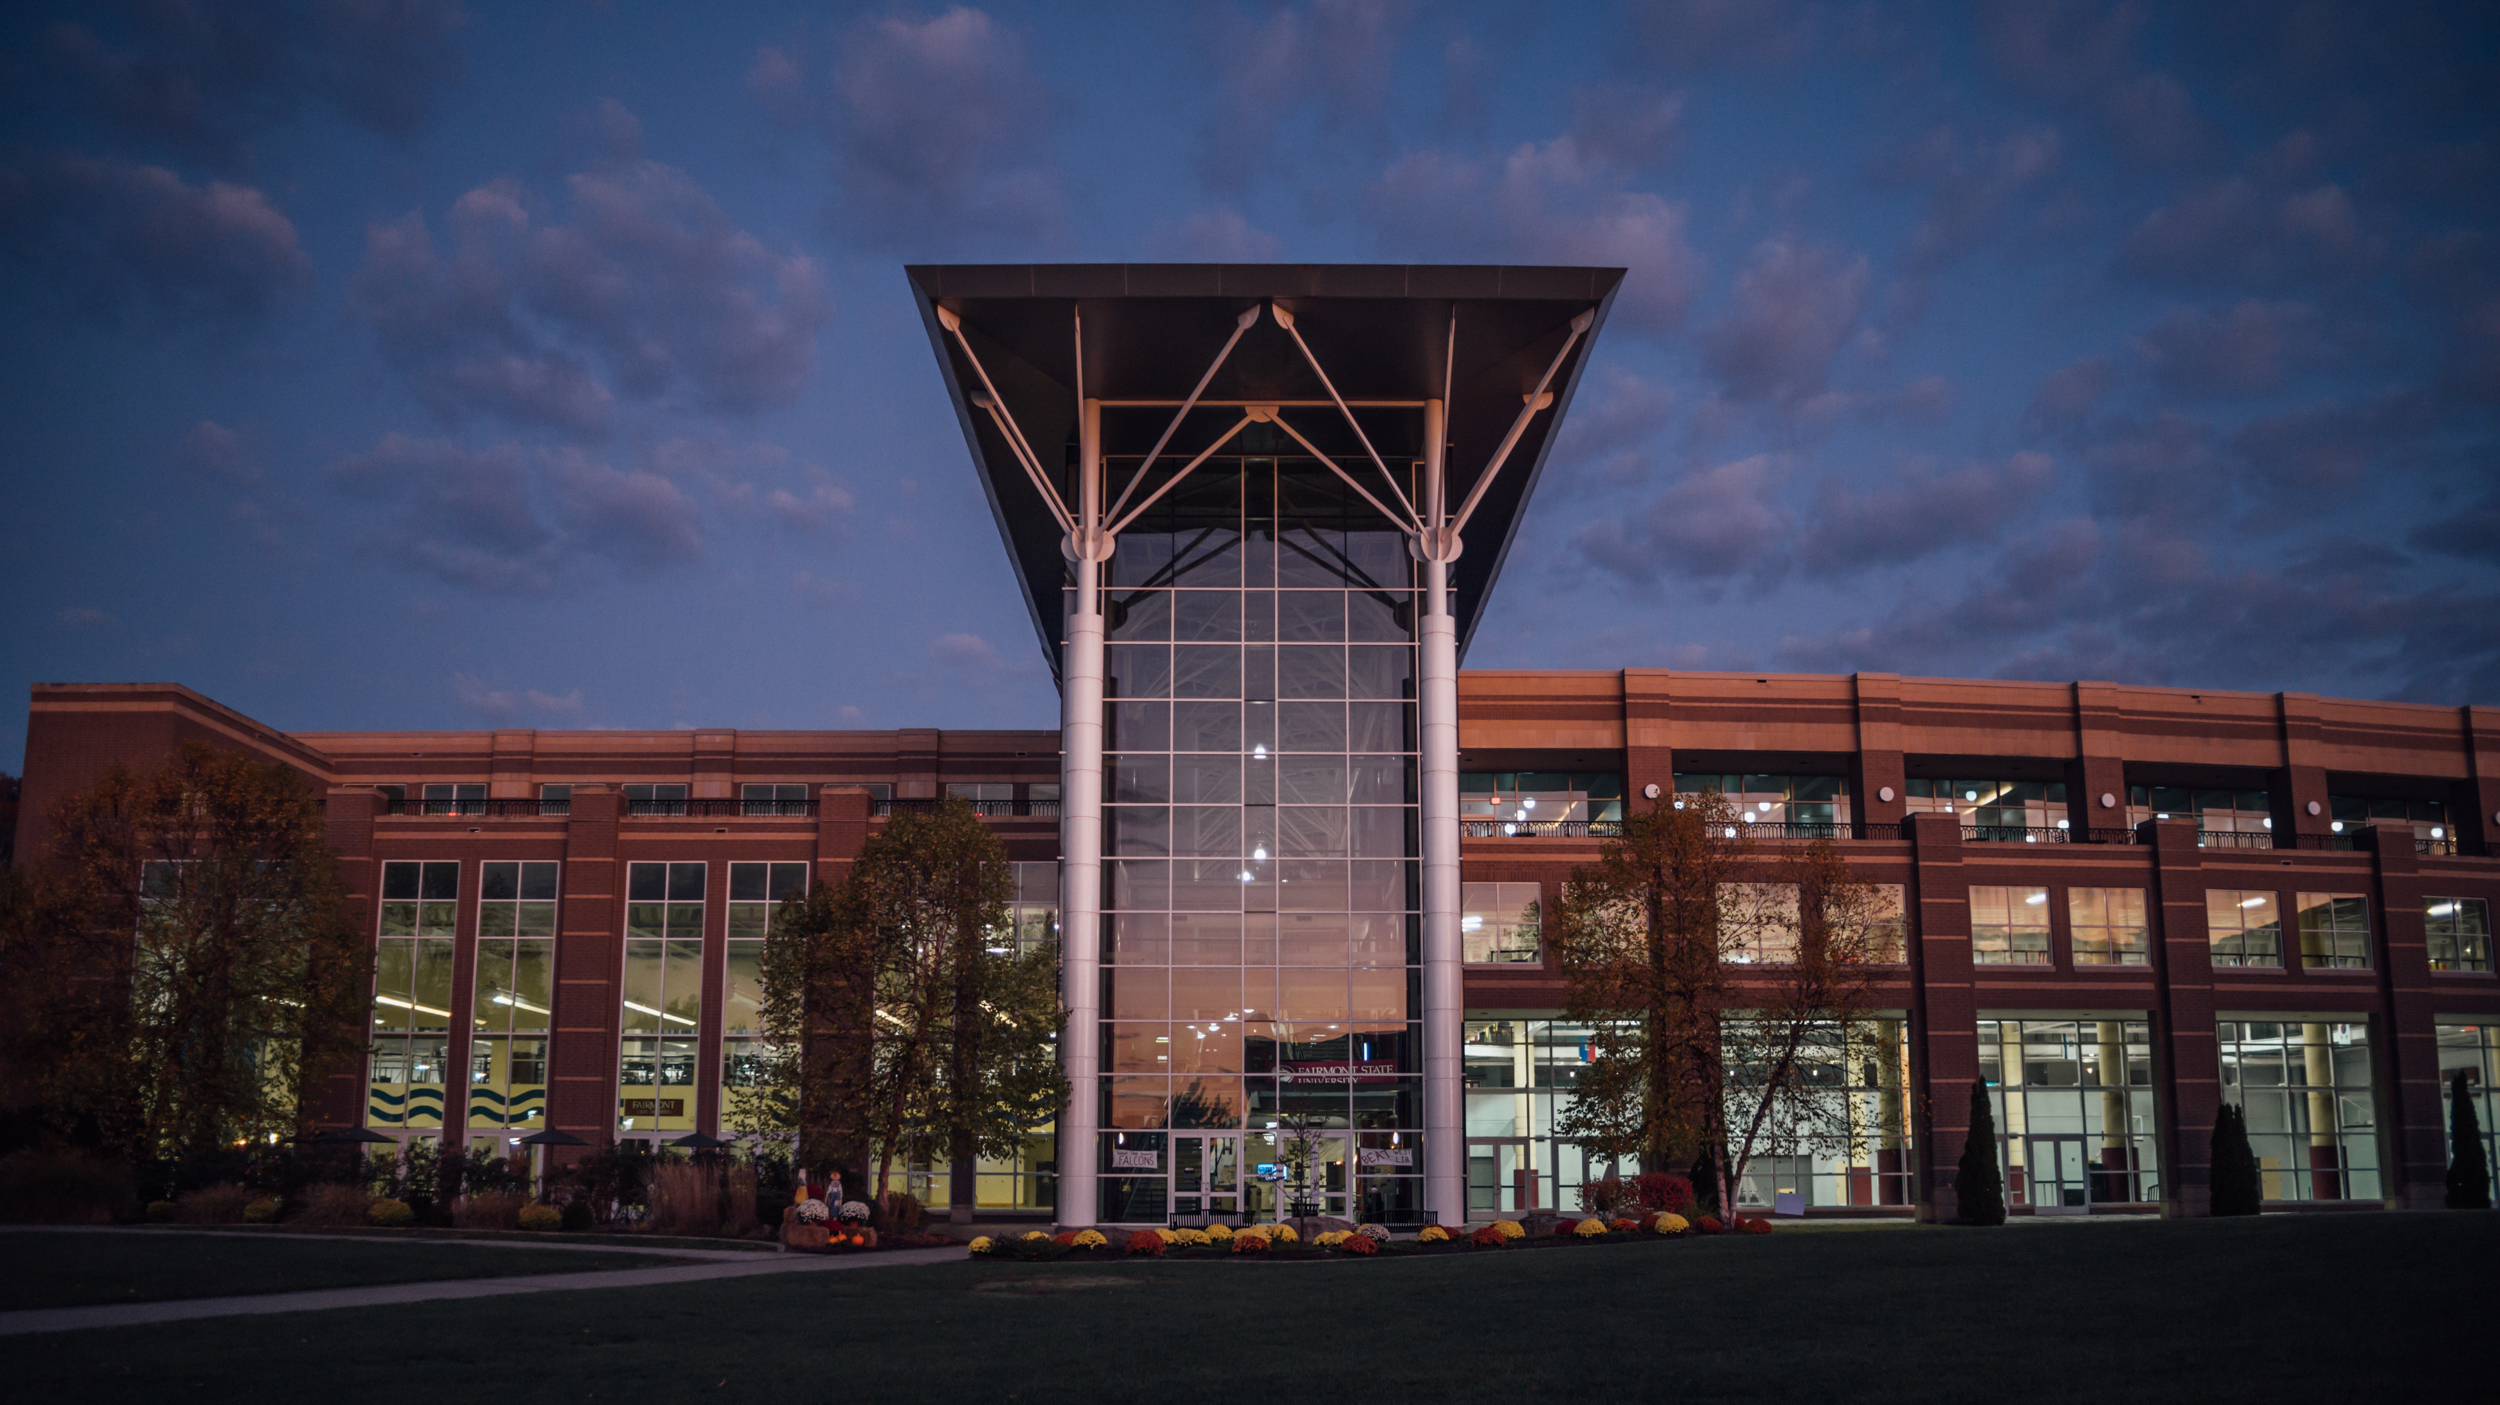 A front view of the Falcon Center, a huge structure with floor to ceiling glass. Here, the building is pictured at night with soft lights glowing inside and reflecting in the windows.